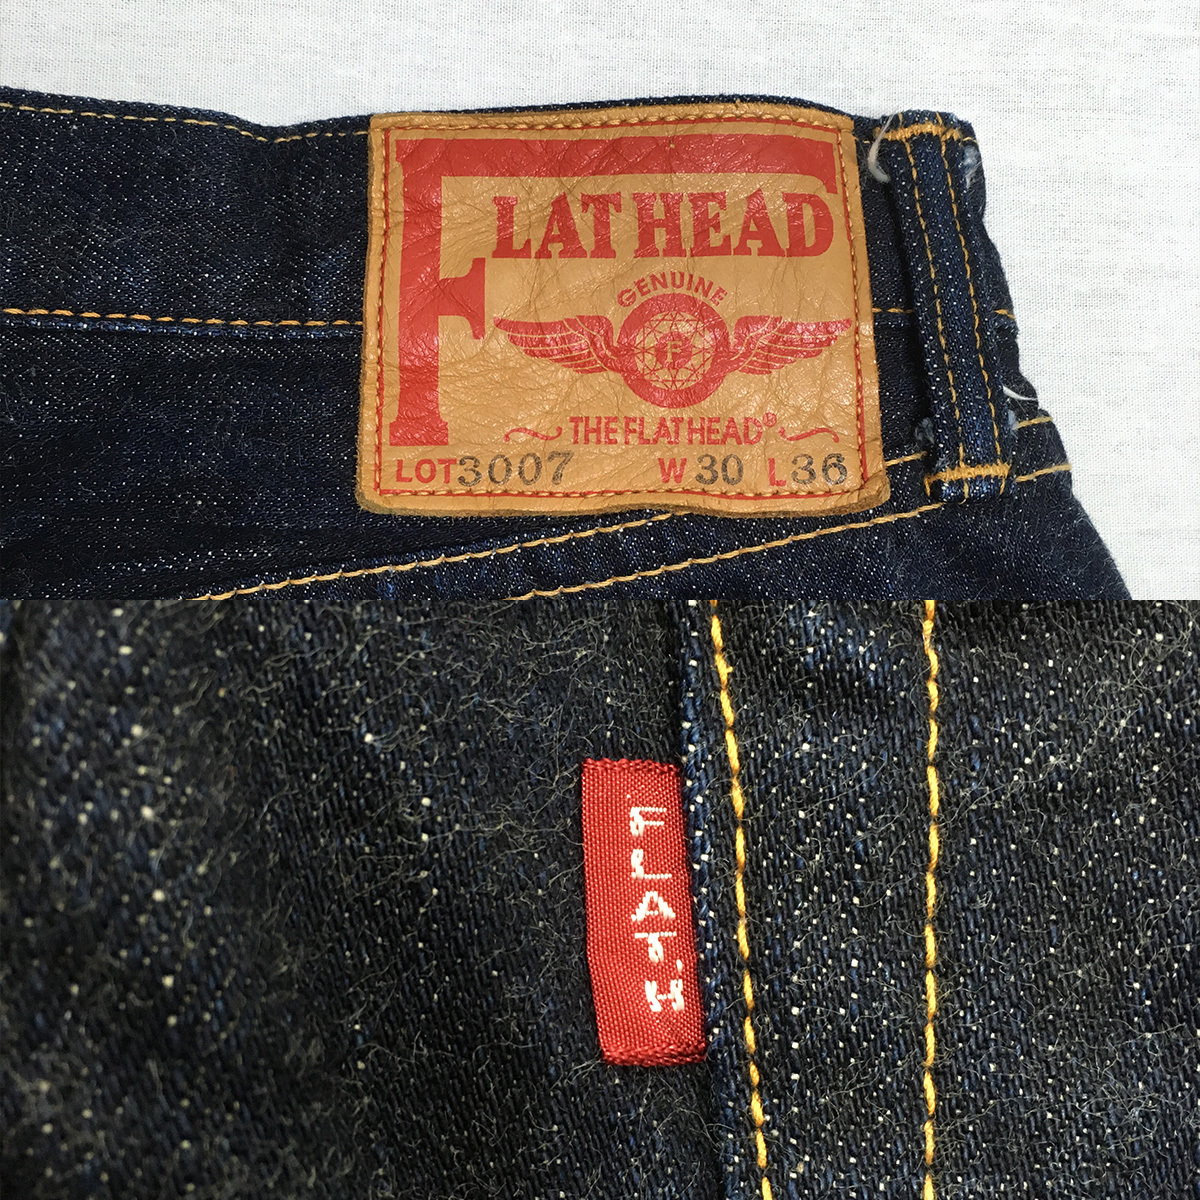 THE FLAT HEAD Flat Head 3007 made in Japan boots cut W30 L36 jeans Zip fly cell bichi leather patch 14.5oz red tab.. rivet 